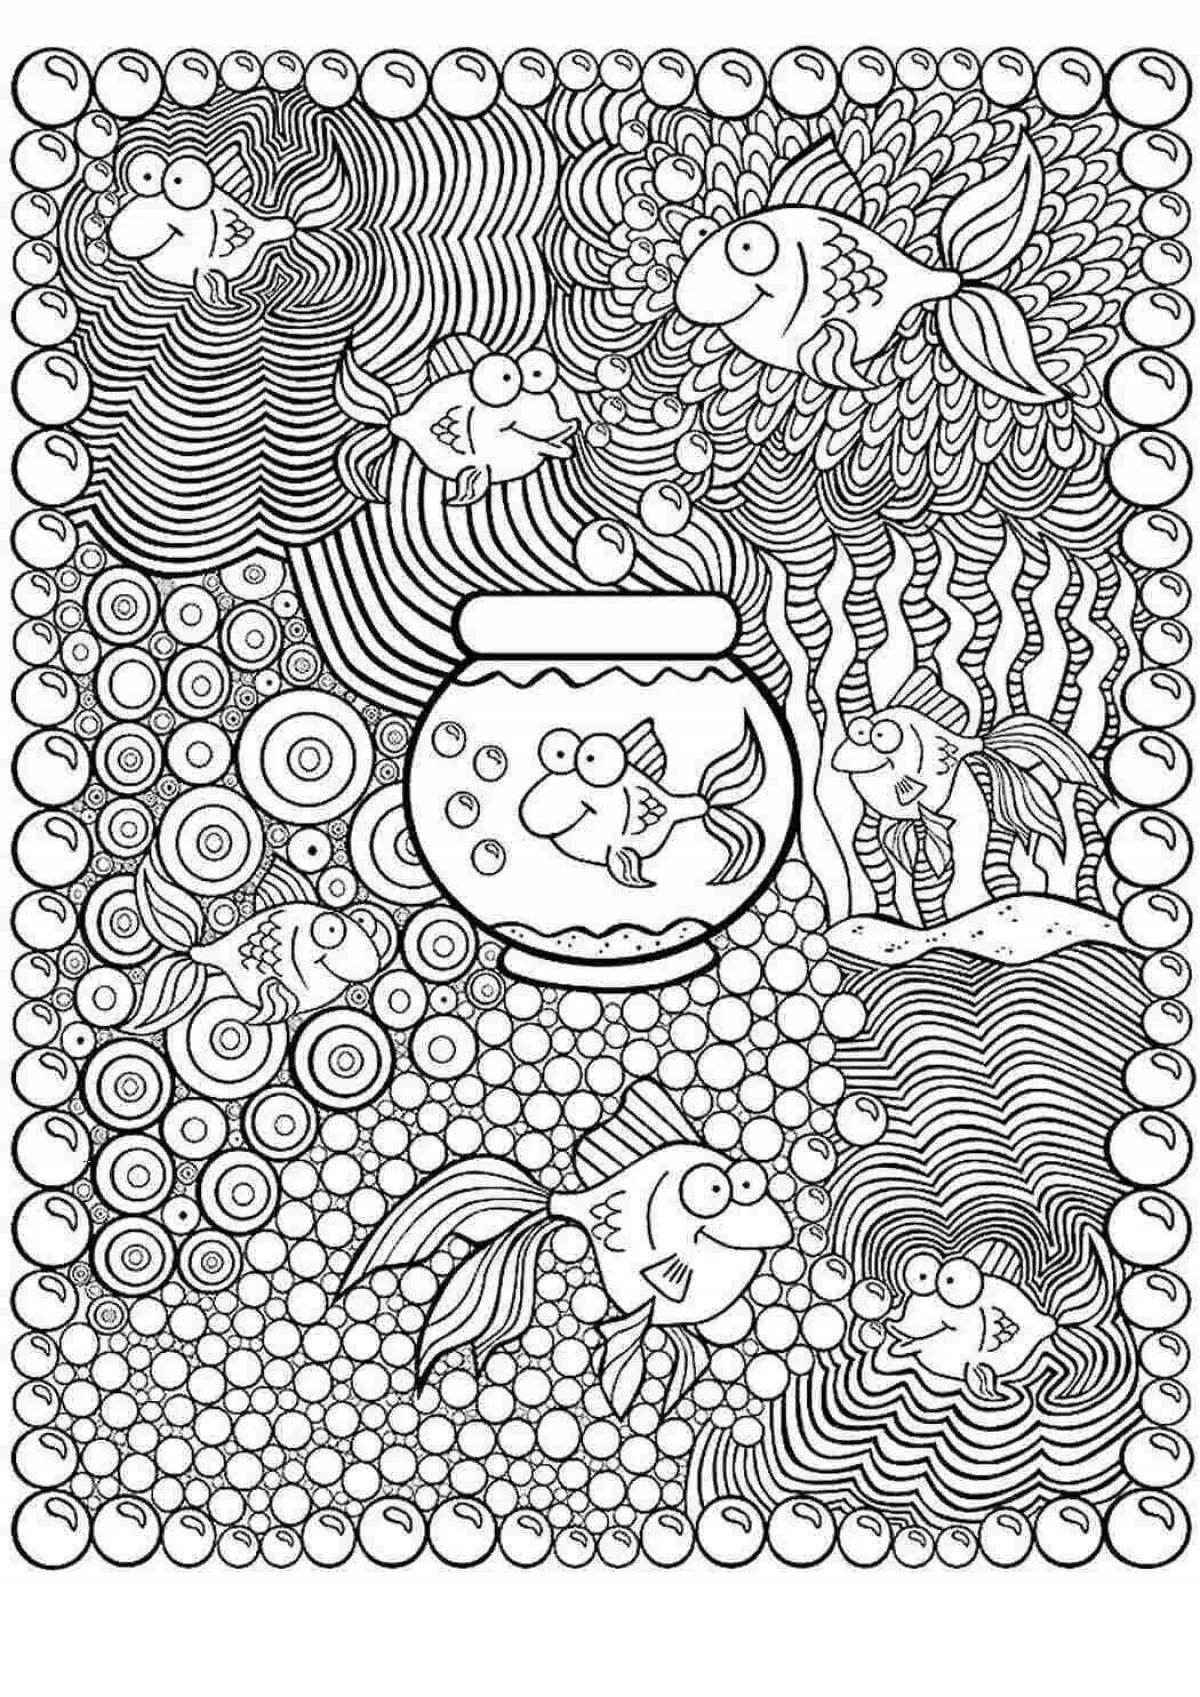 Relaxing coloring book for children